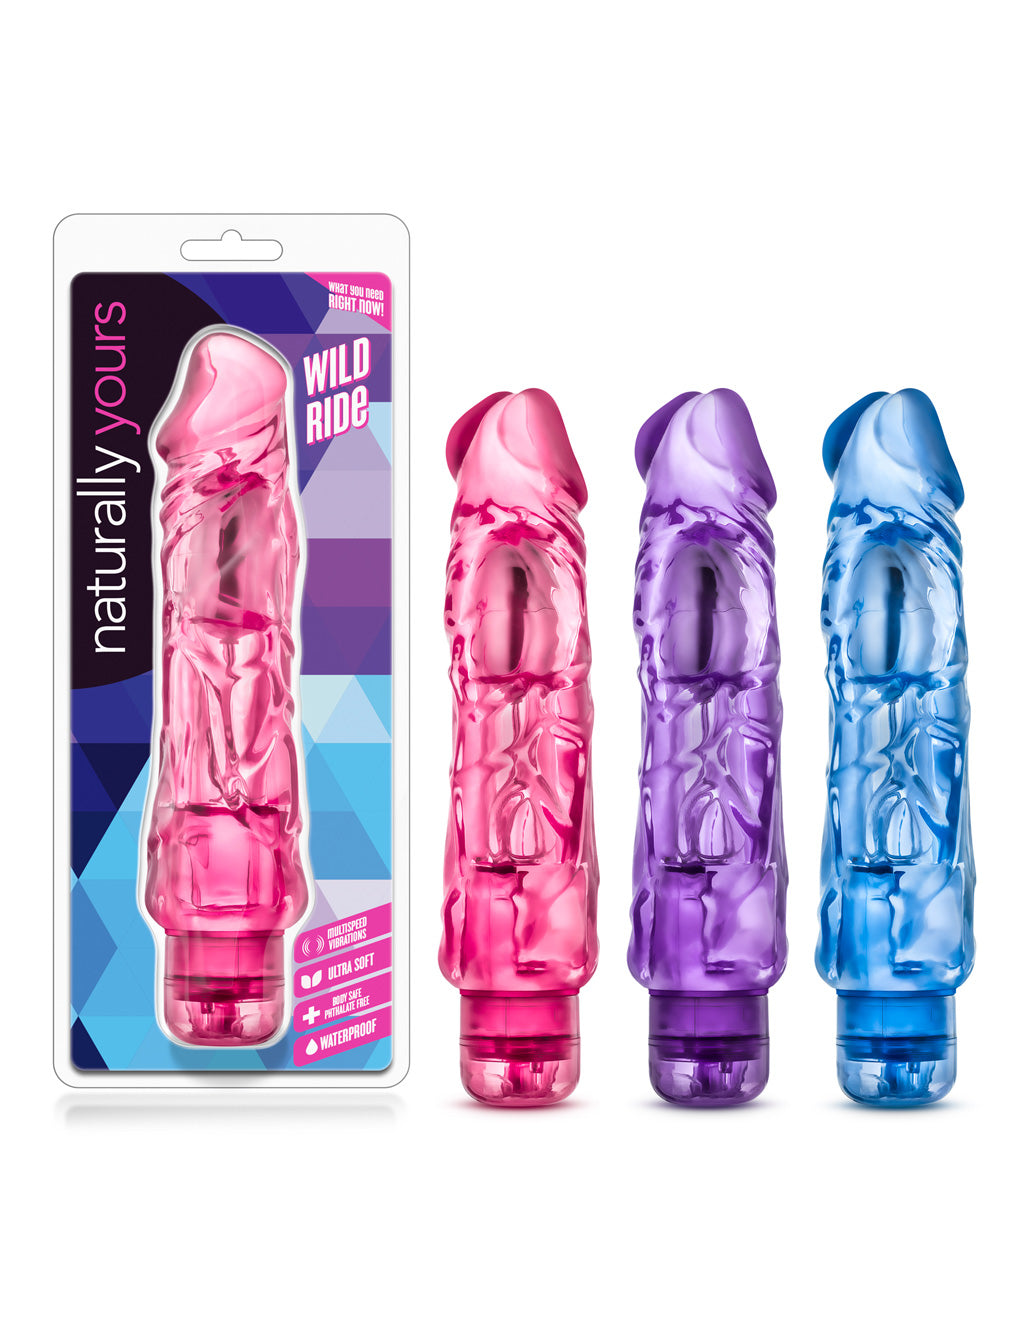 Naturally Yours by Blush Novelties Wild Ride Vibe